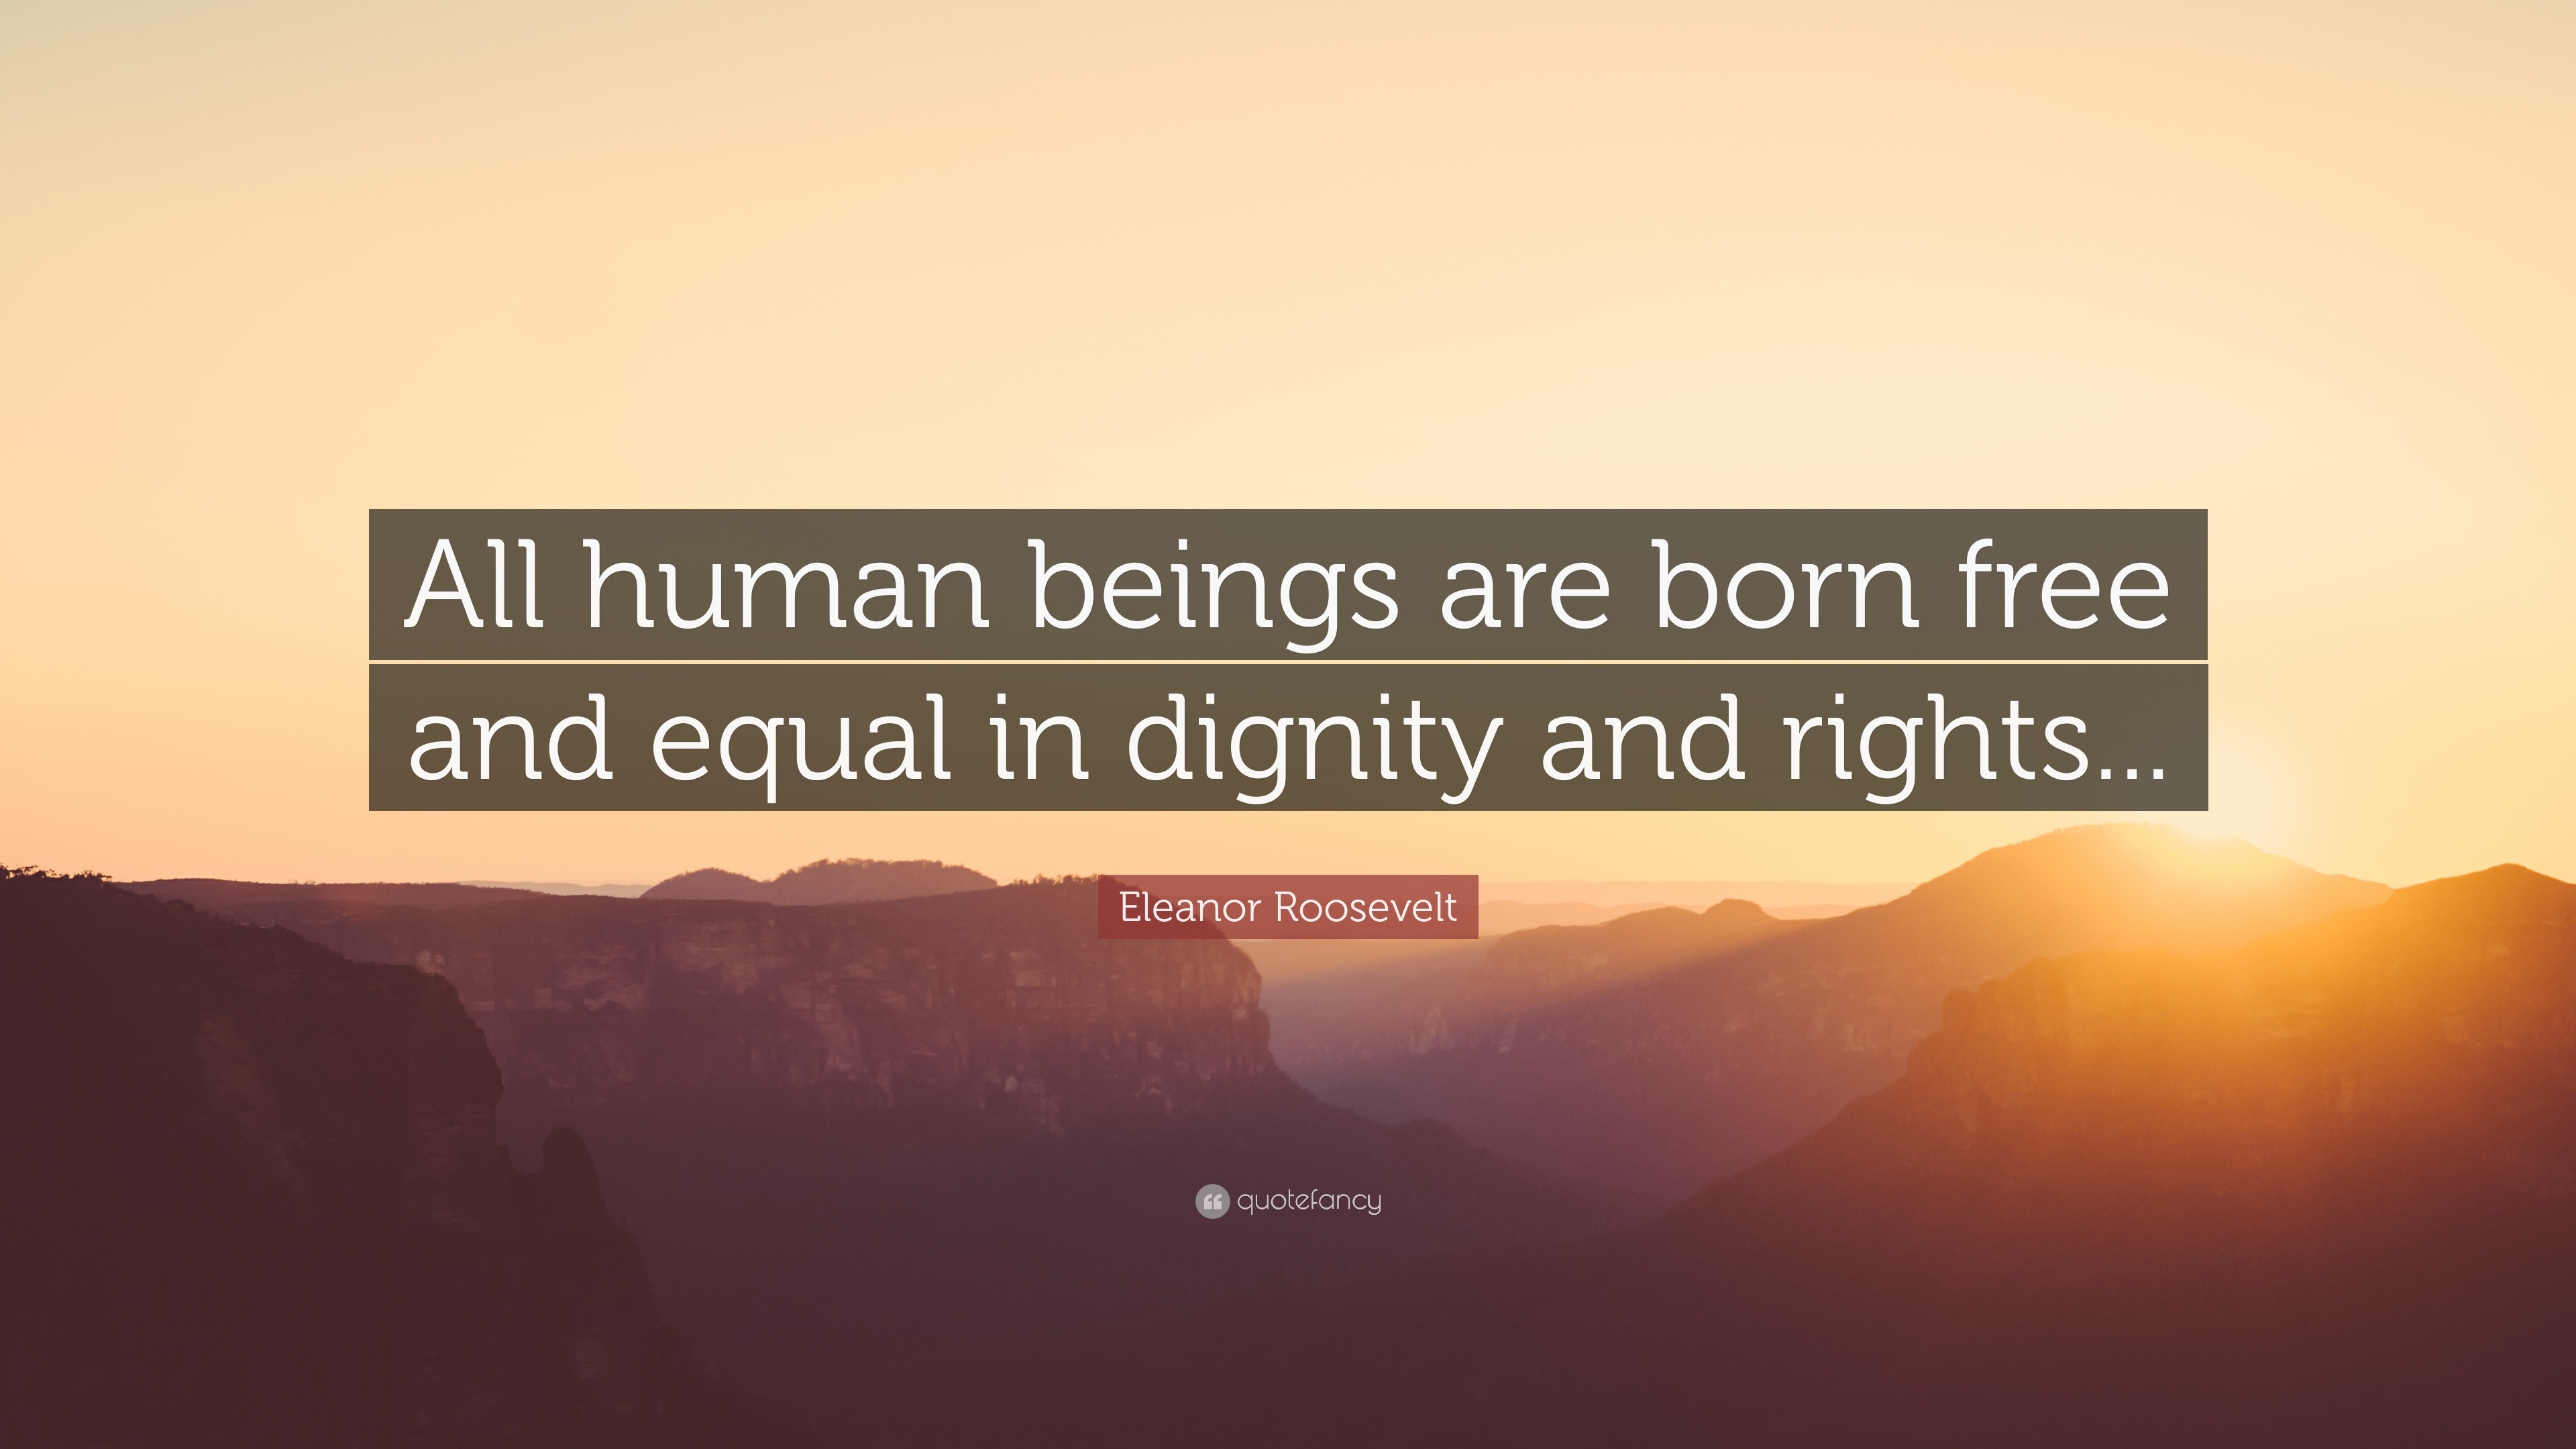 Roosevelt Quote: “All human are born free and equal in dignity and rights...”